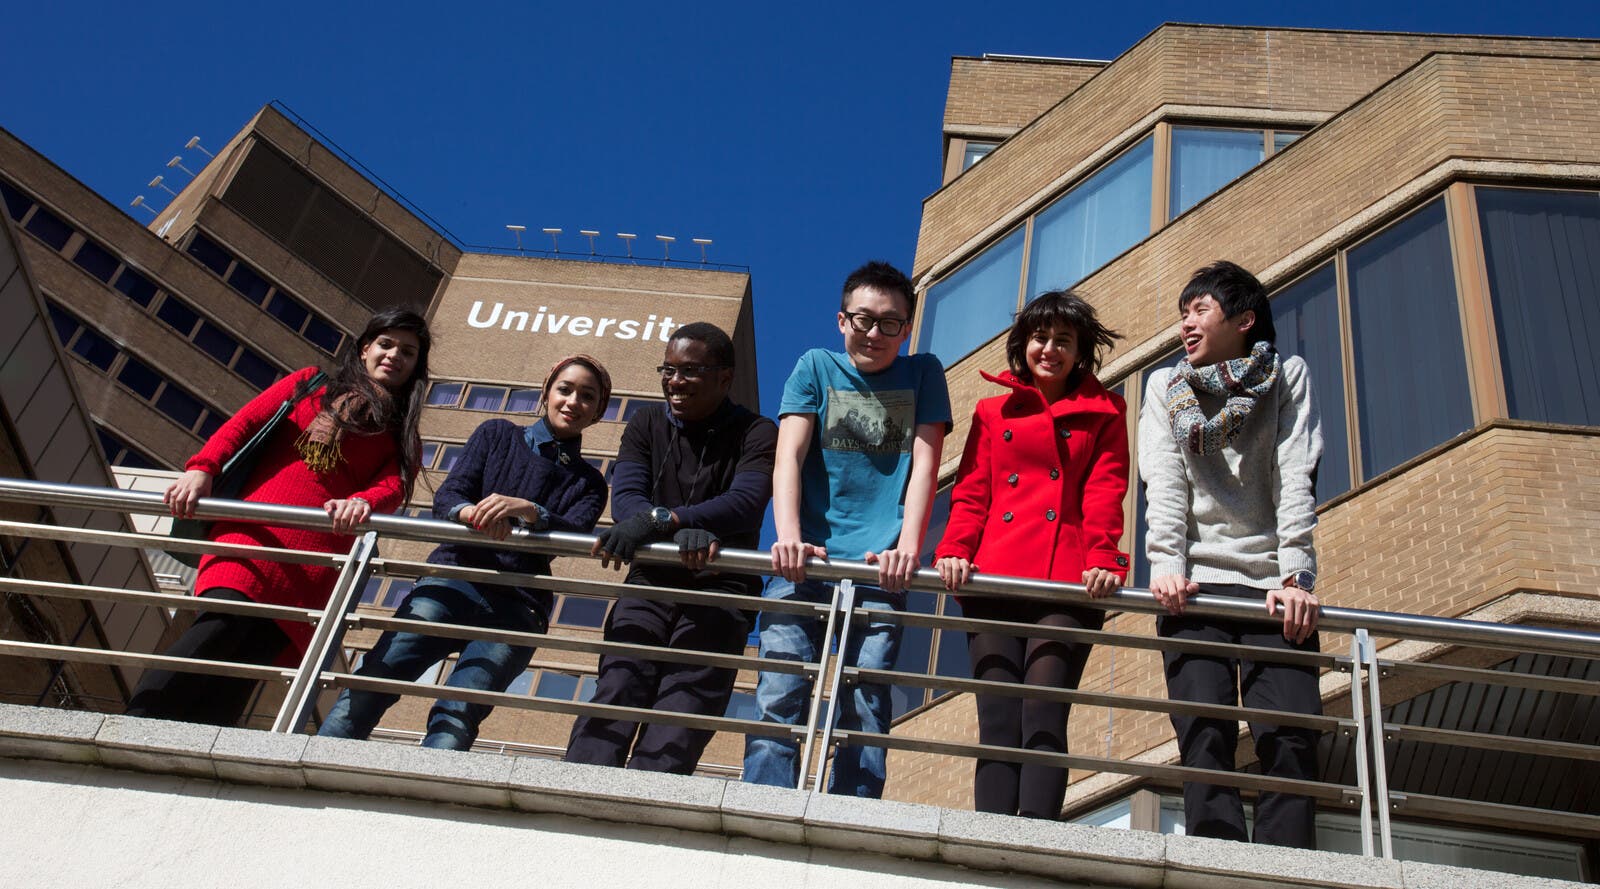 Students leaning over steps in front of campus building